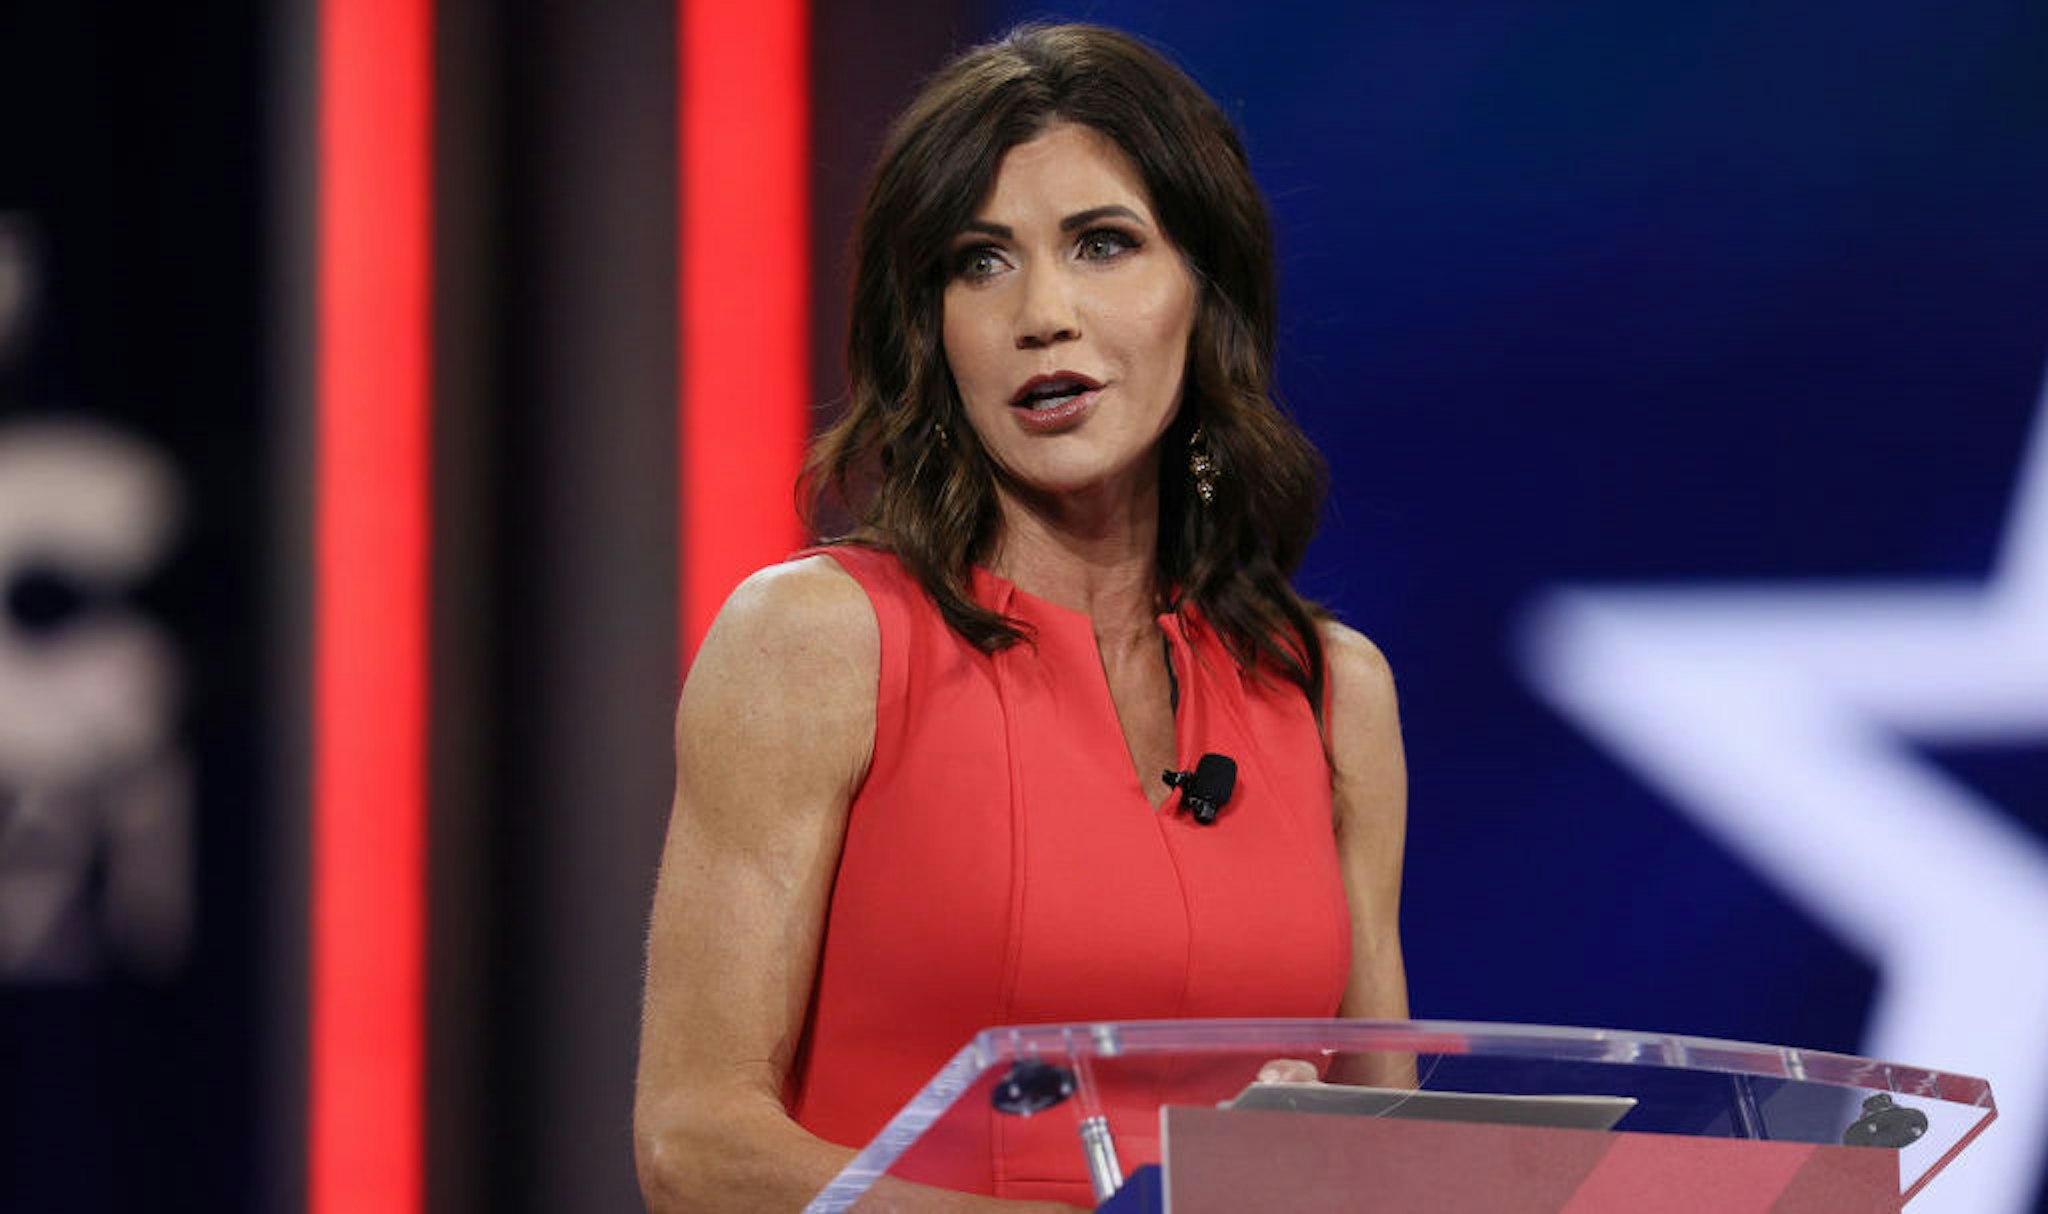 ORLANDO, FLORIDA - FEBRUARY 27: South Dakota Gov. Kristi Noem addresses the Conservative Political Action Conference held in the Hyatt Regency on February 27, 2021 in Orlando, Florida. Begun in 1974, CPAC brings together conservative organizations, activists, and world leaders to discuss issues important to them. (Photo by Joe Raedle/Getty Images)